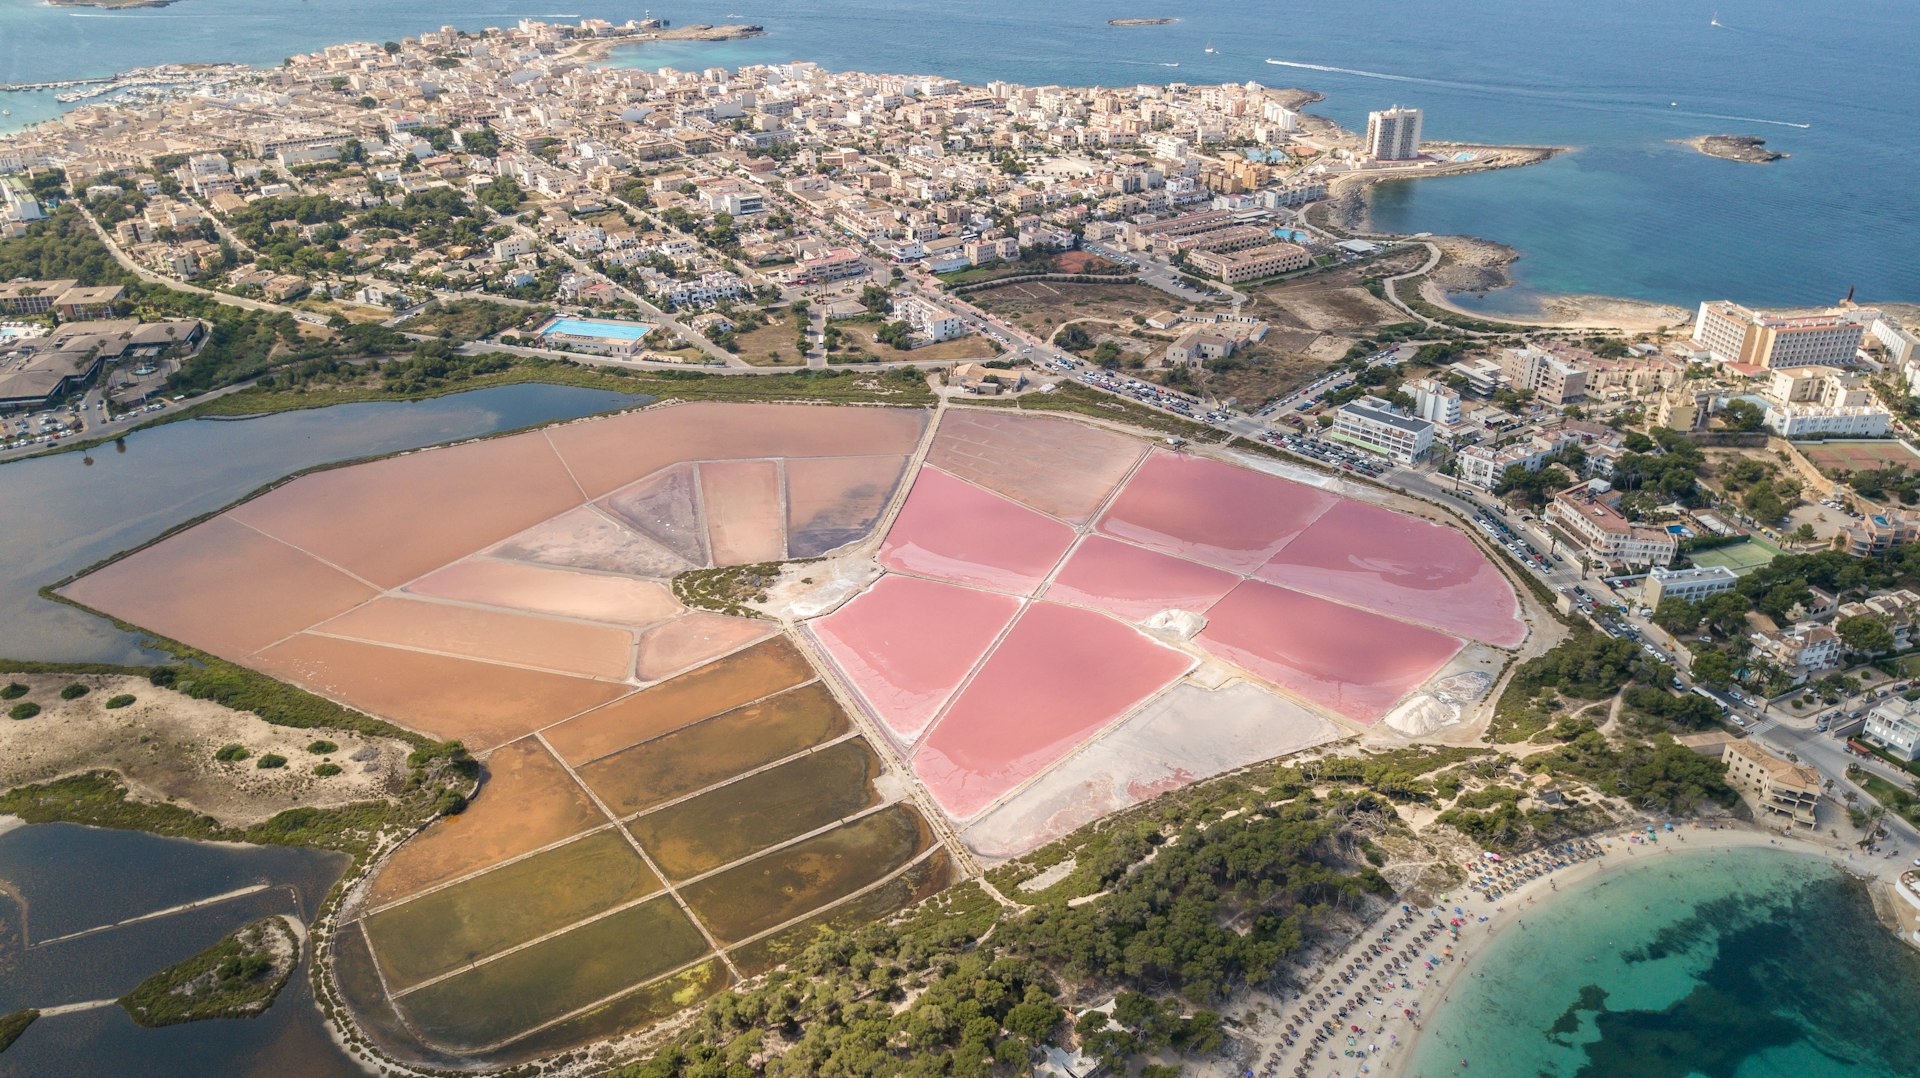 Pink salt flats sit near a turquoise lagoon and blue sea waters rimmed by a white cityscape at Colonia de Sant Jordi in Spain